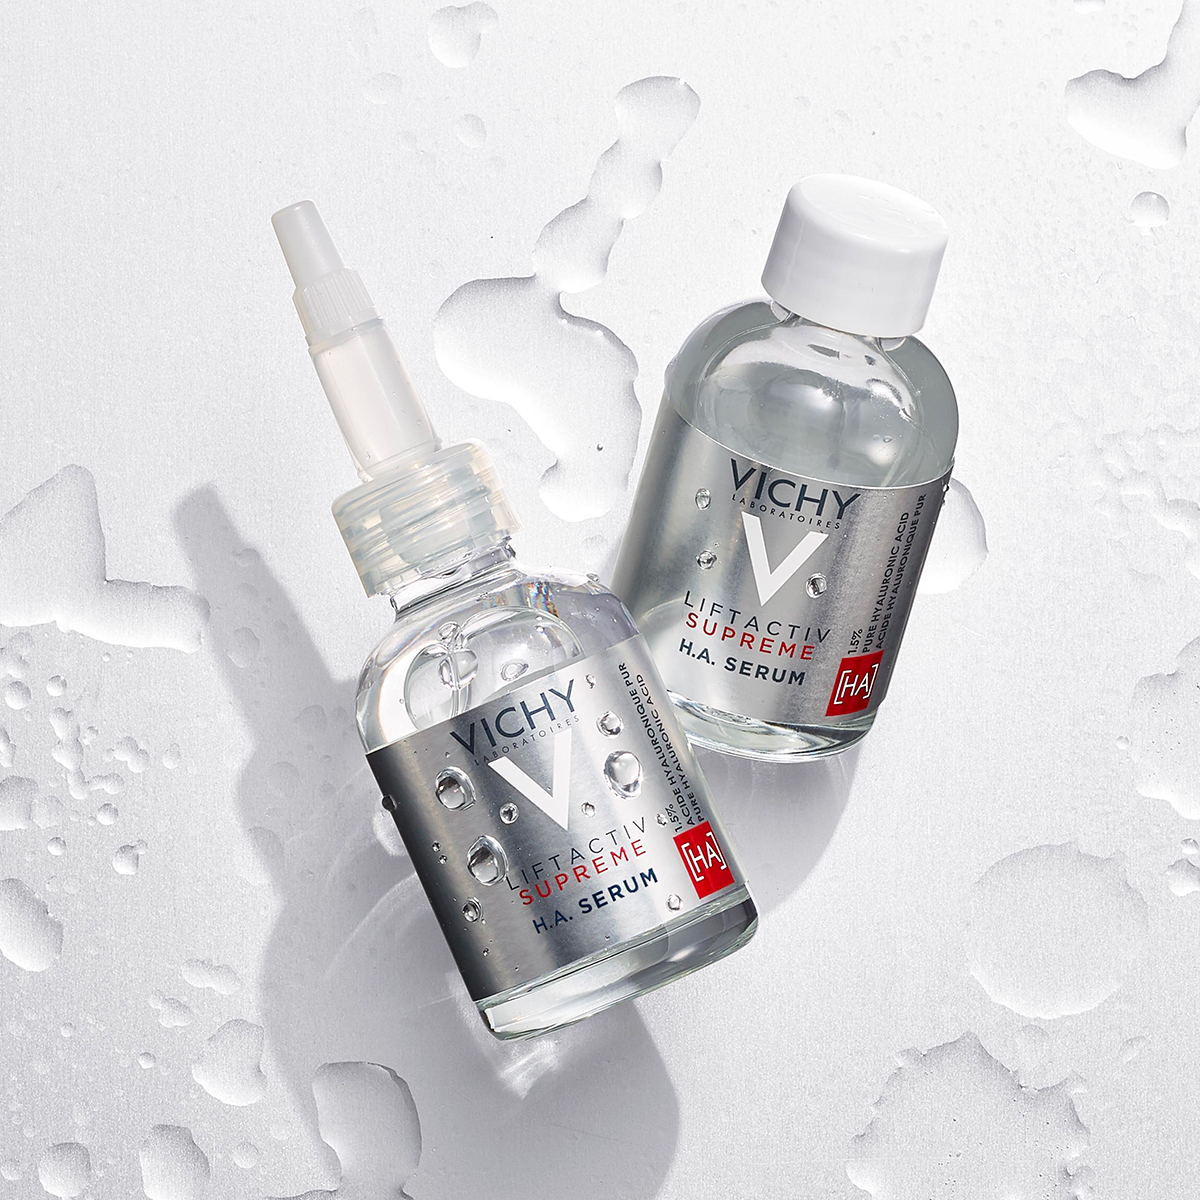 Here’s What to Buy From Vichy’s Boxing Day Sale